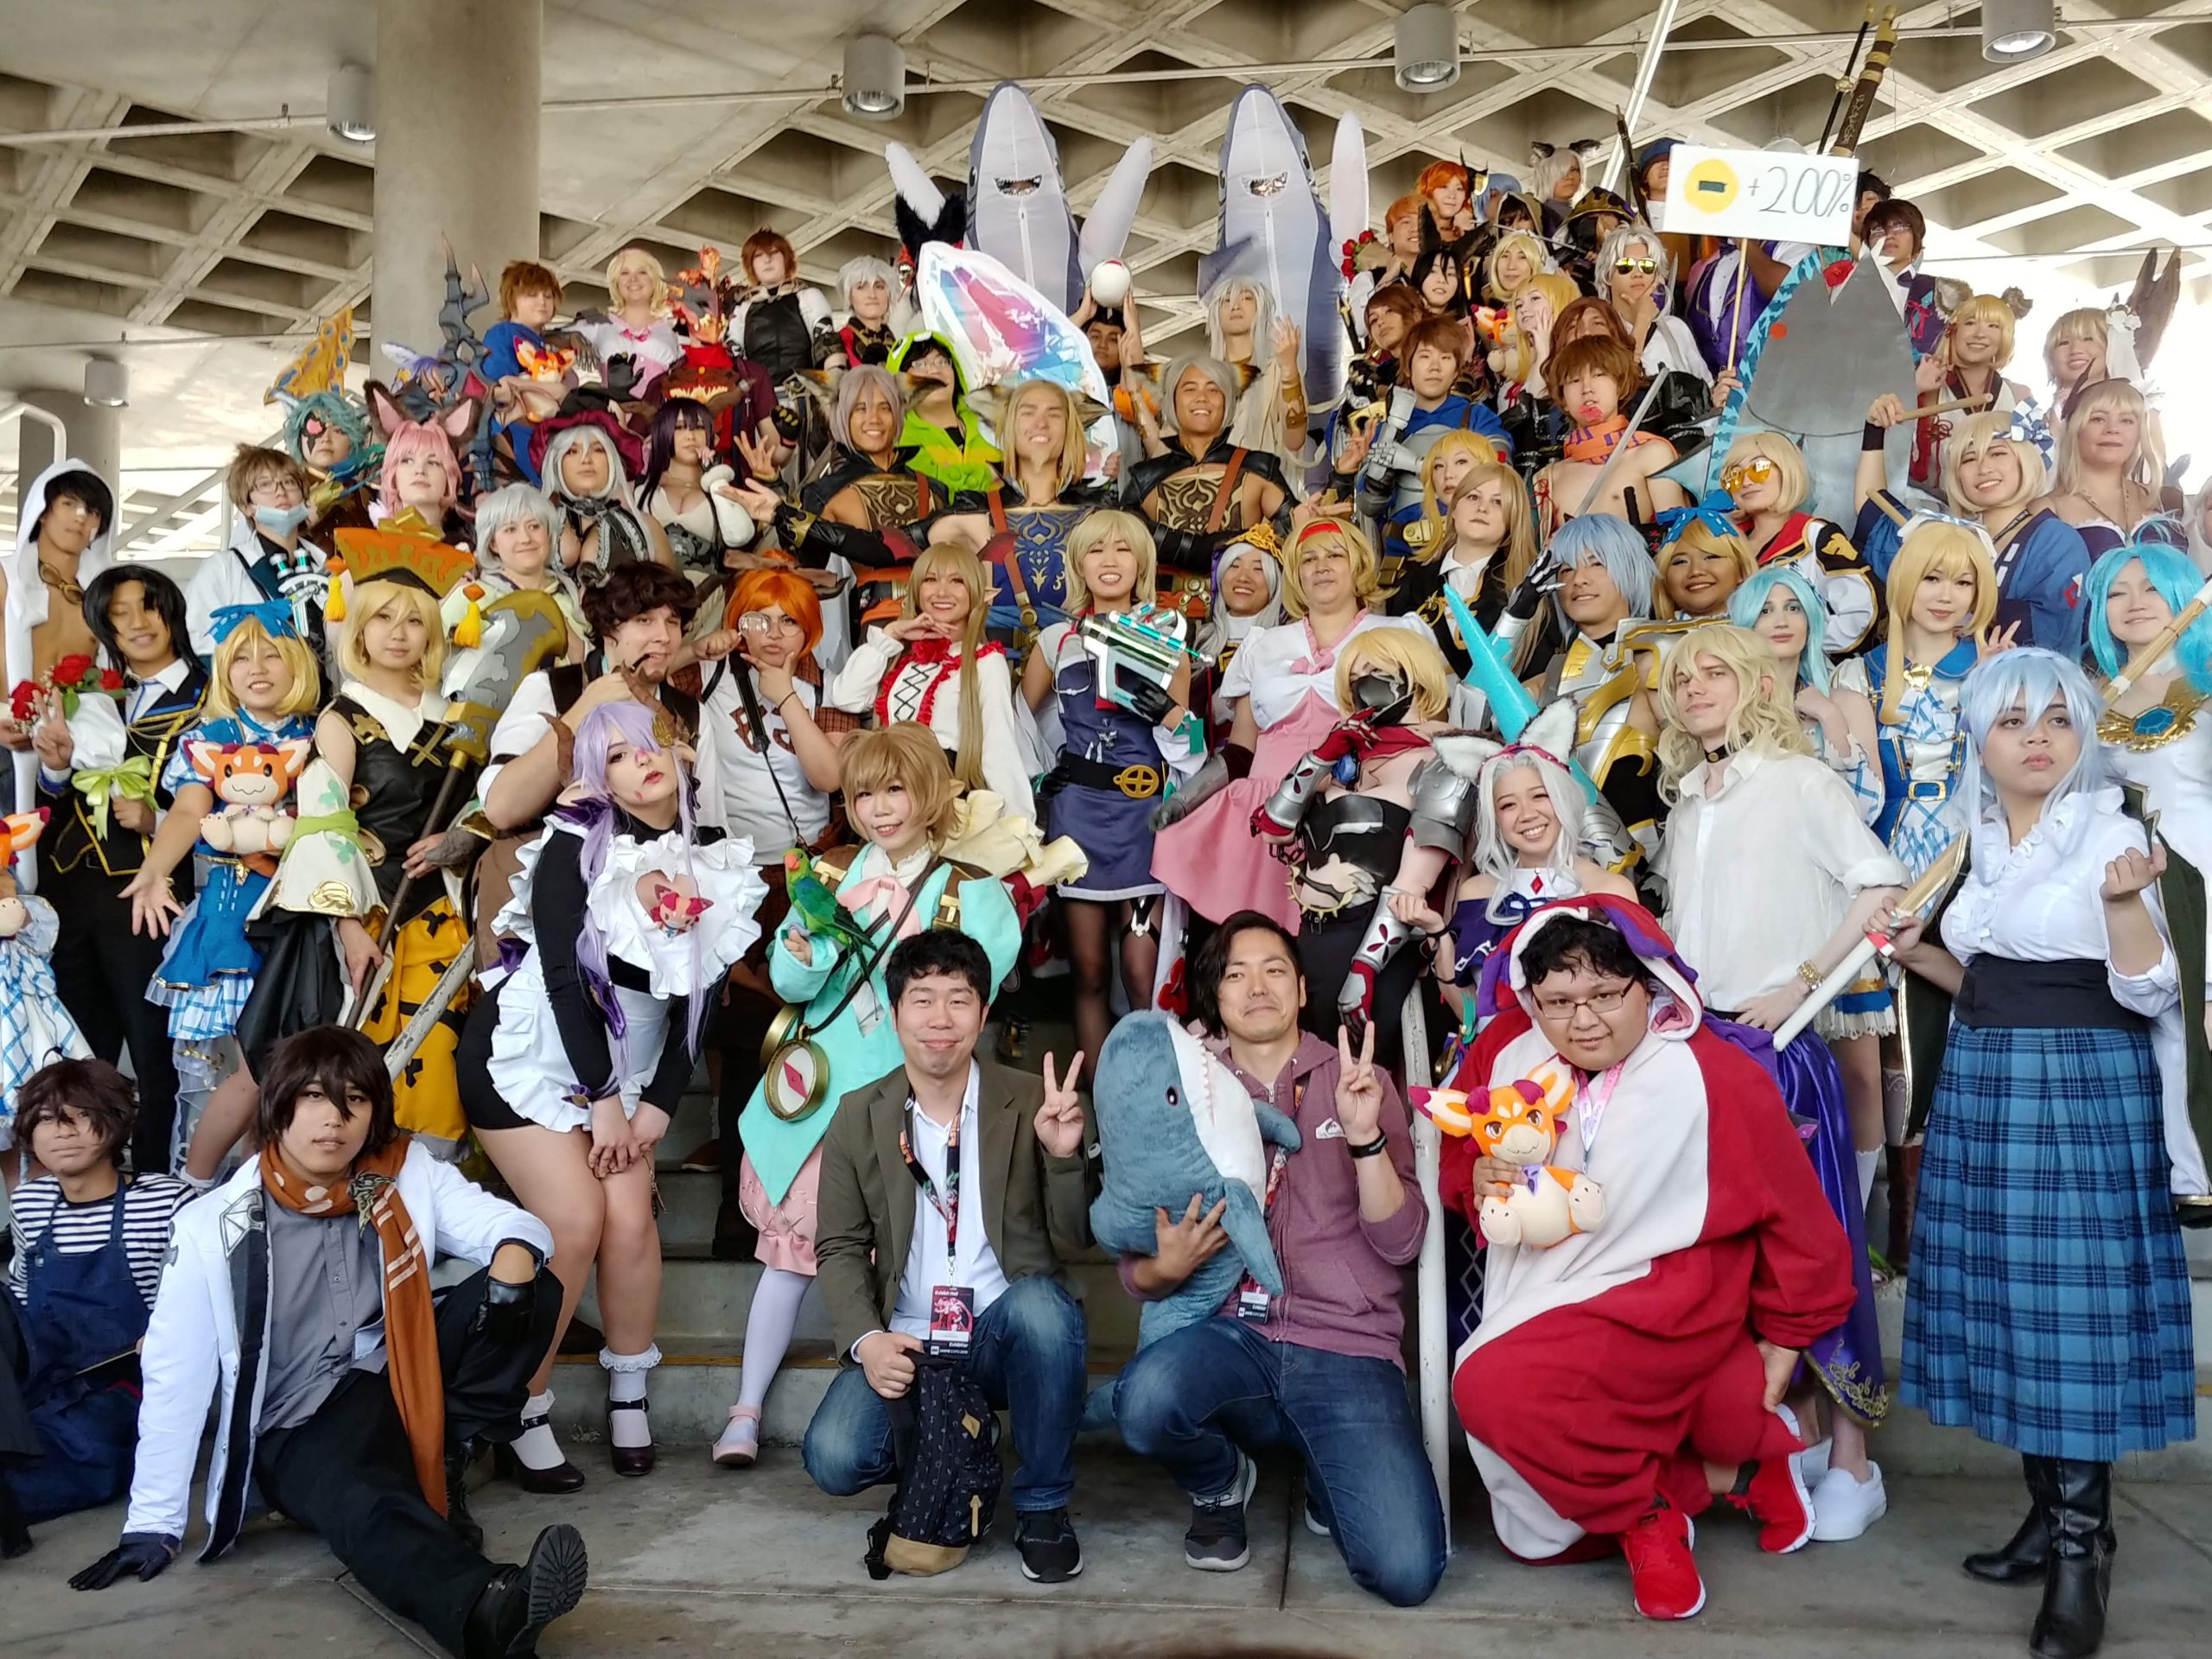 Granblue Fan Gathering at Anime Expo 2019